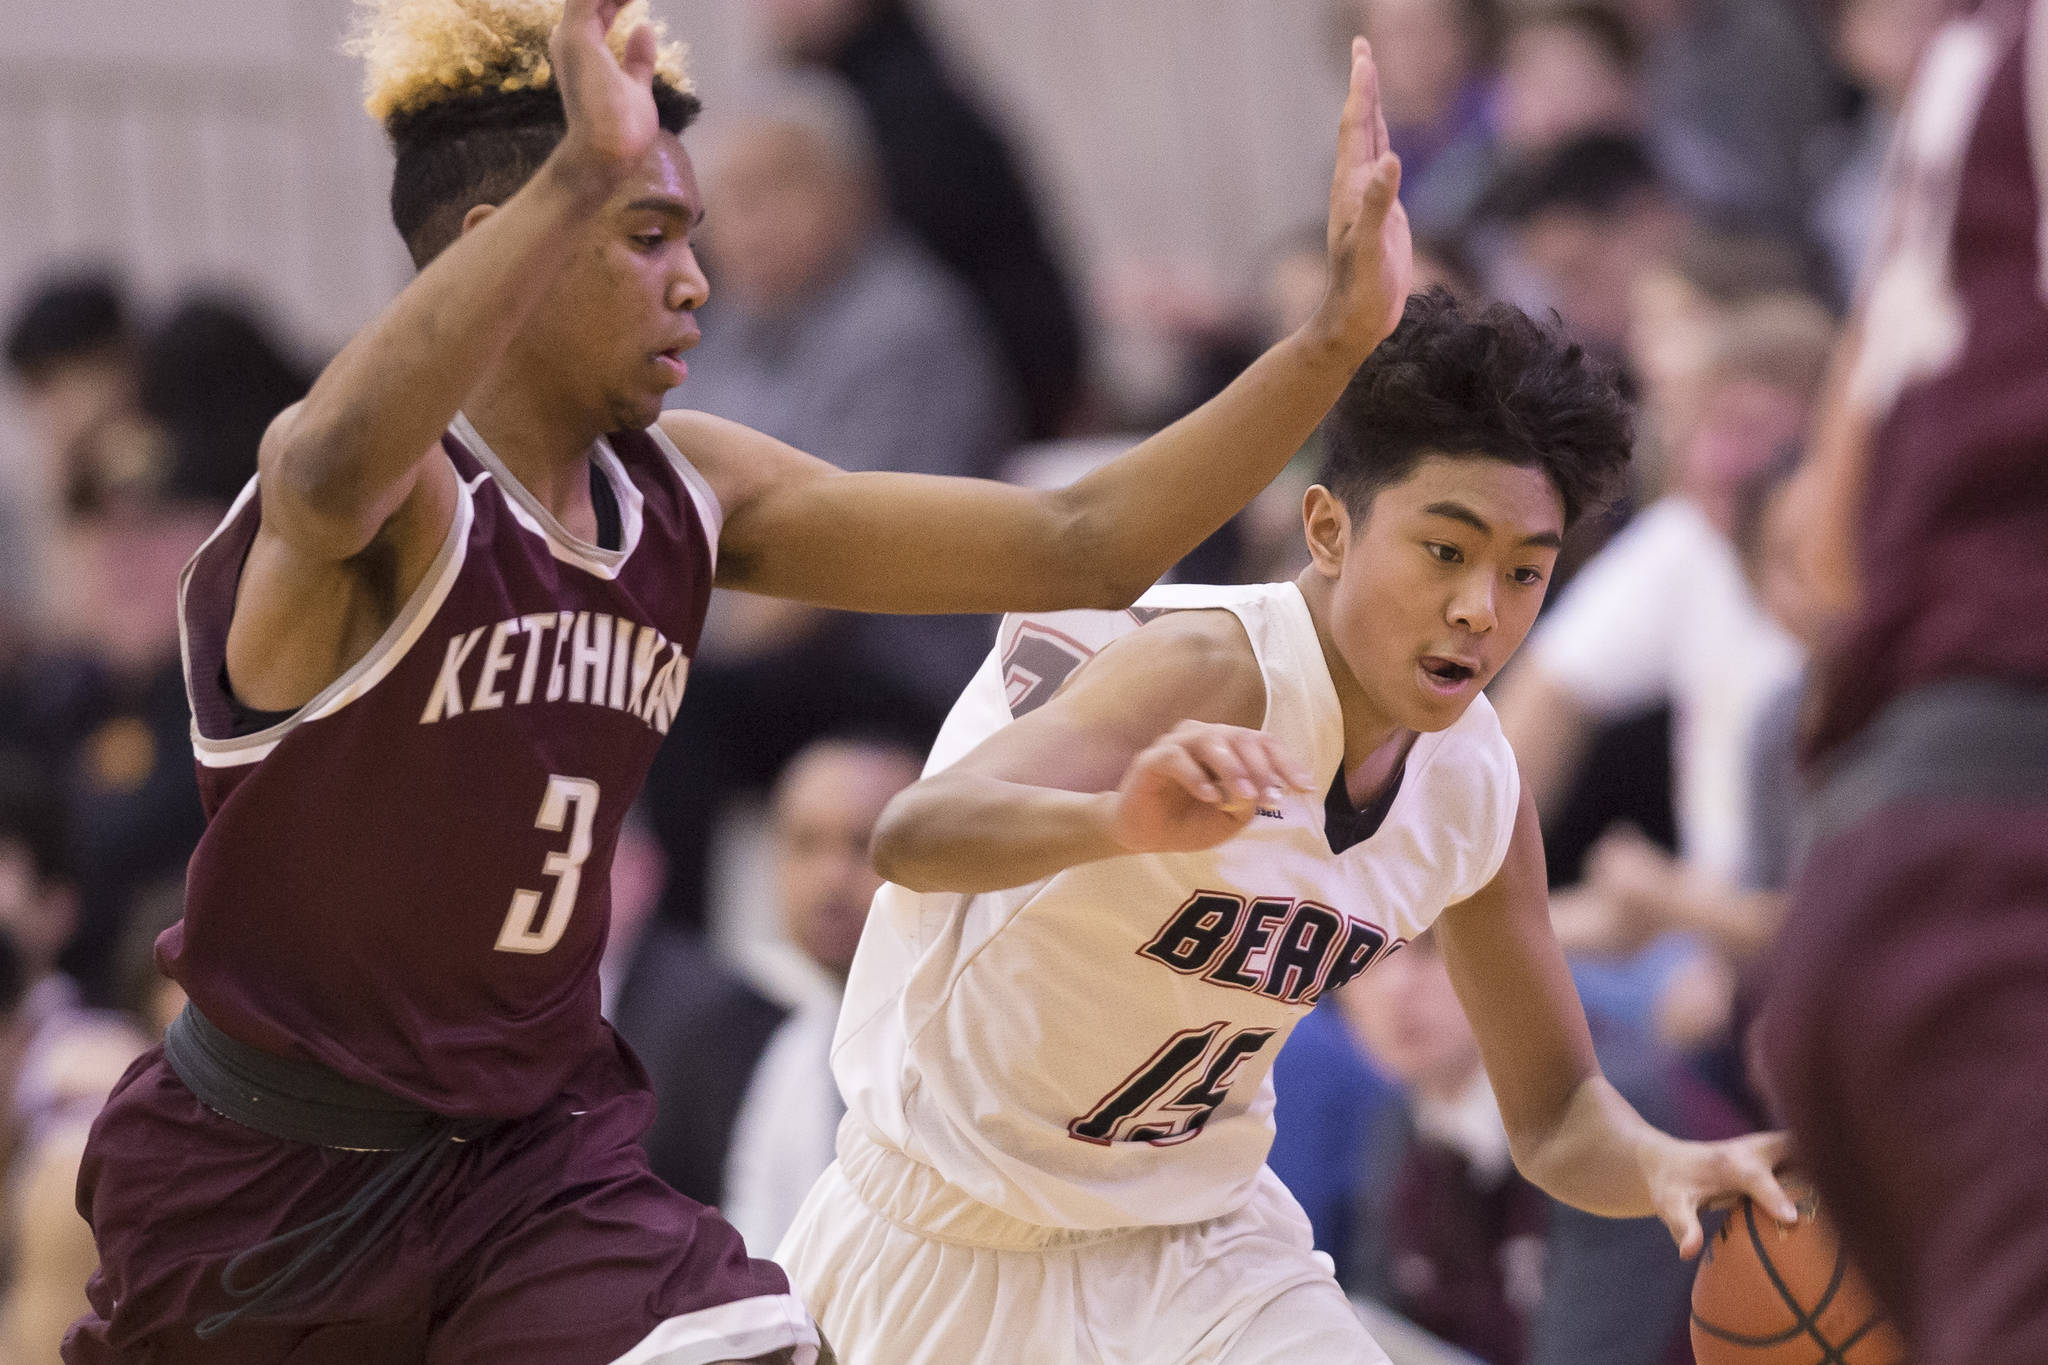 Juneau-Douglas’ Israel Yadao, right, drives against Ketchikan’s Marcus Lee at JDHS during a conference win last February. Lee earned first team all-state honors last season. (Michael Penn | Juneau Empire File)